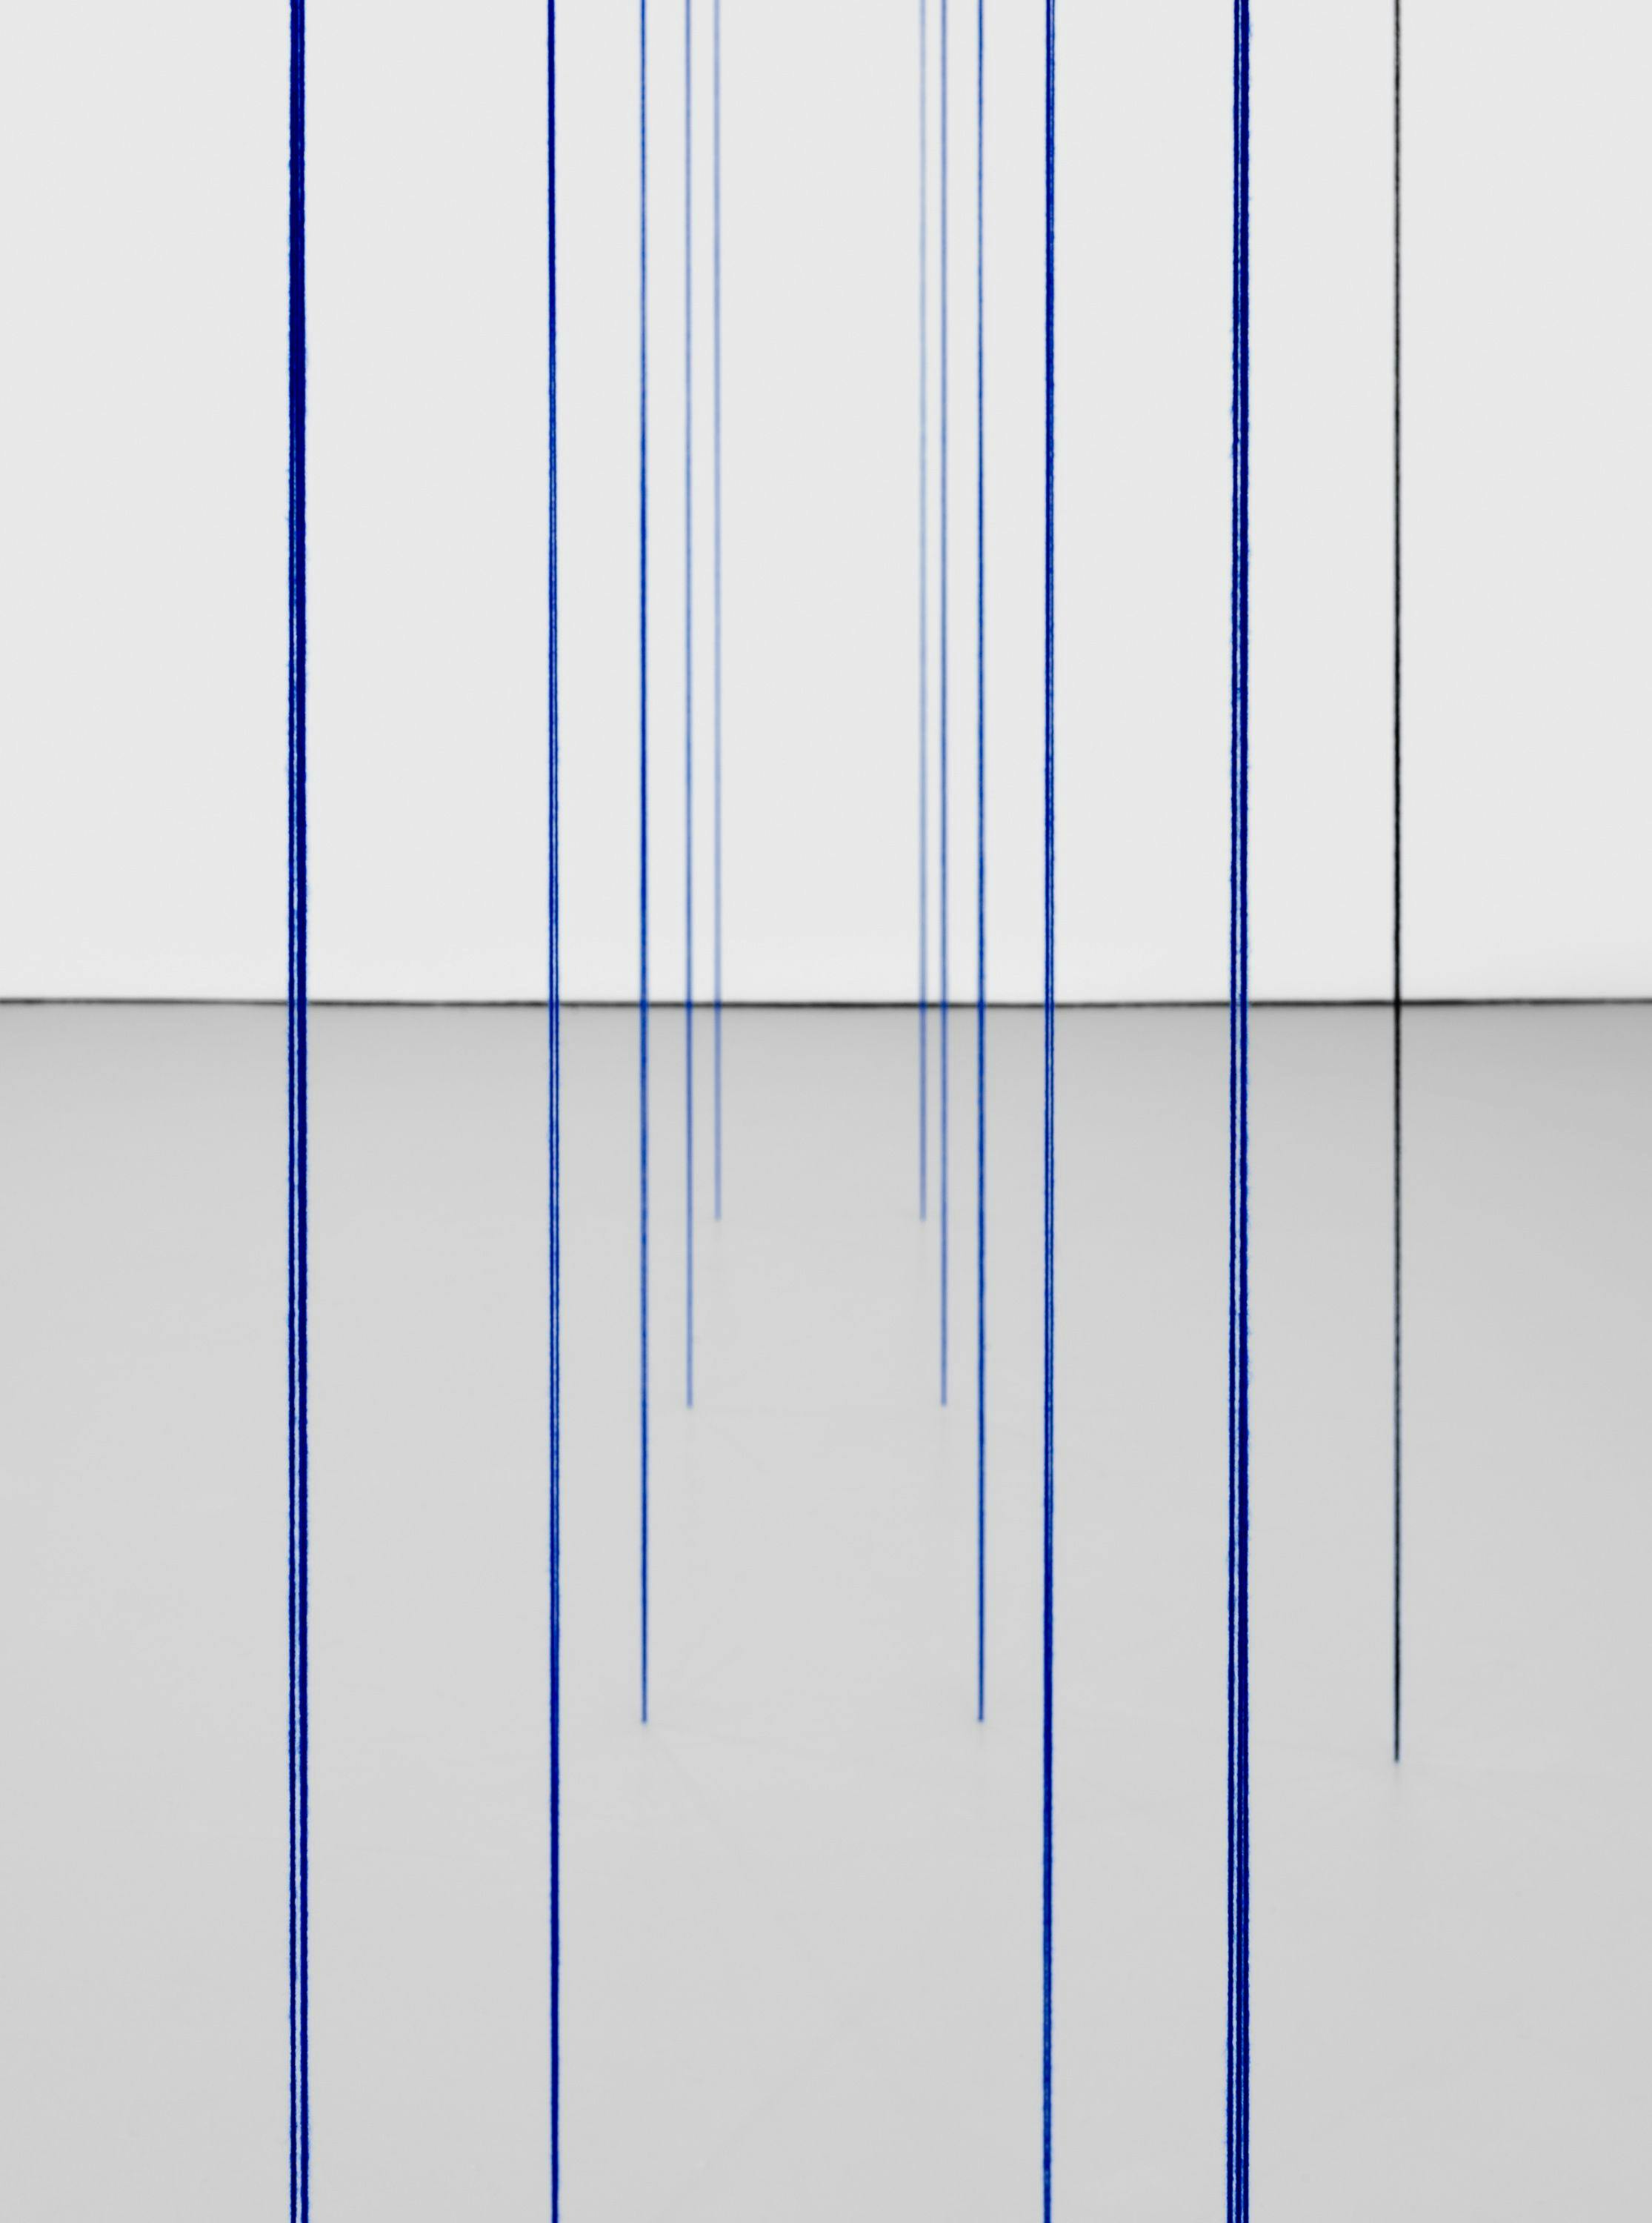 A detail from a black, blue, white, and light yellow acrylic yarn artwork by Fred Sandback, titled Untitled (Sculptural Study, Eighteen-part Architectonic Vertical Construction), 1987 and 2018.